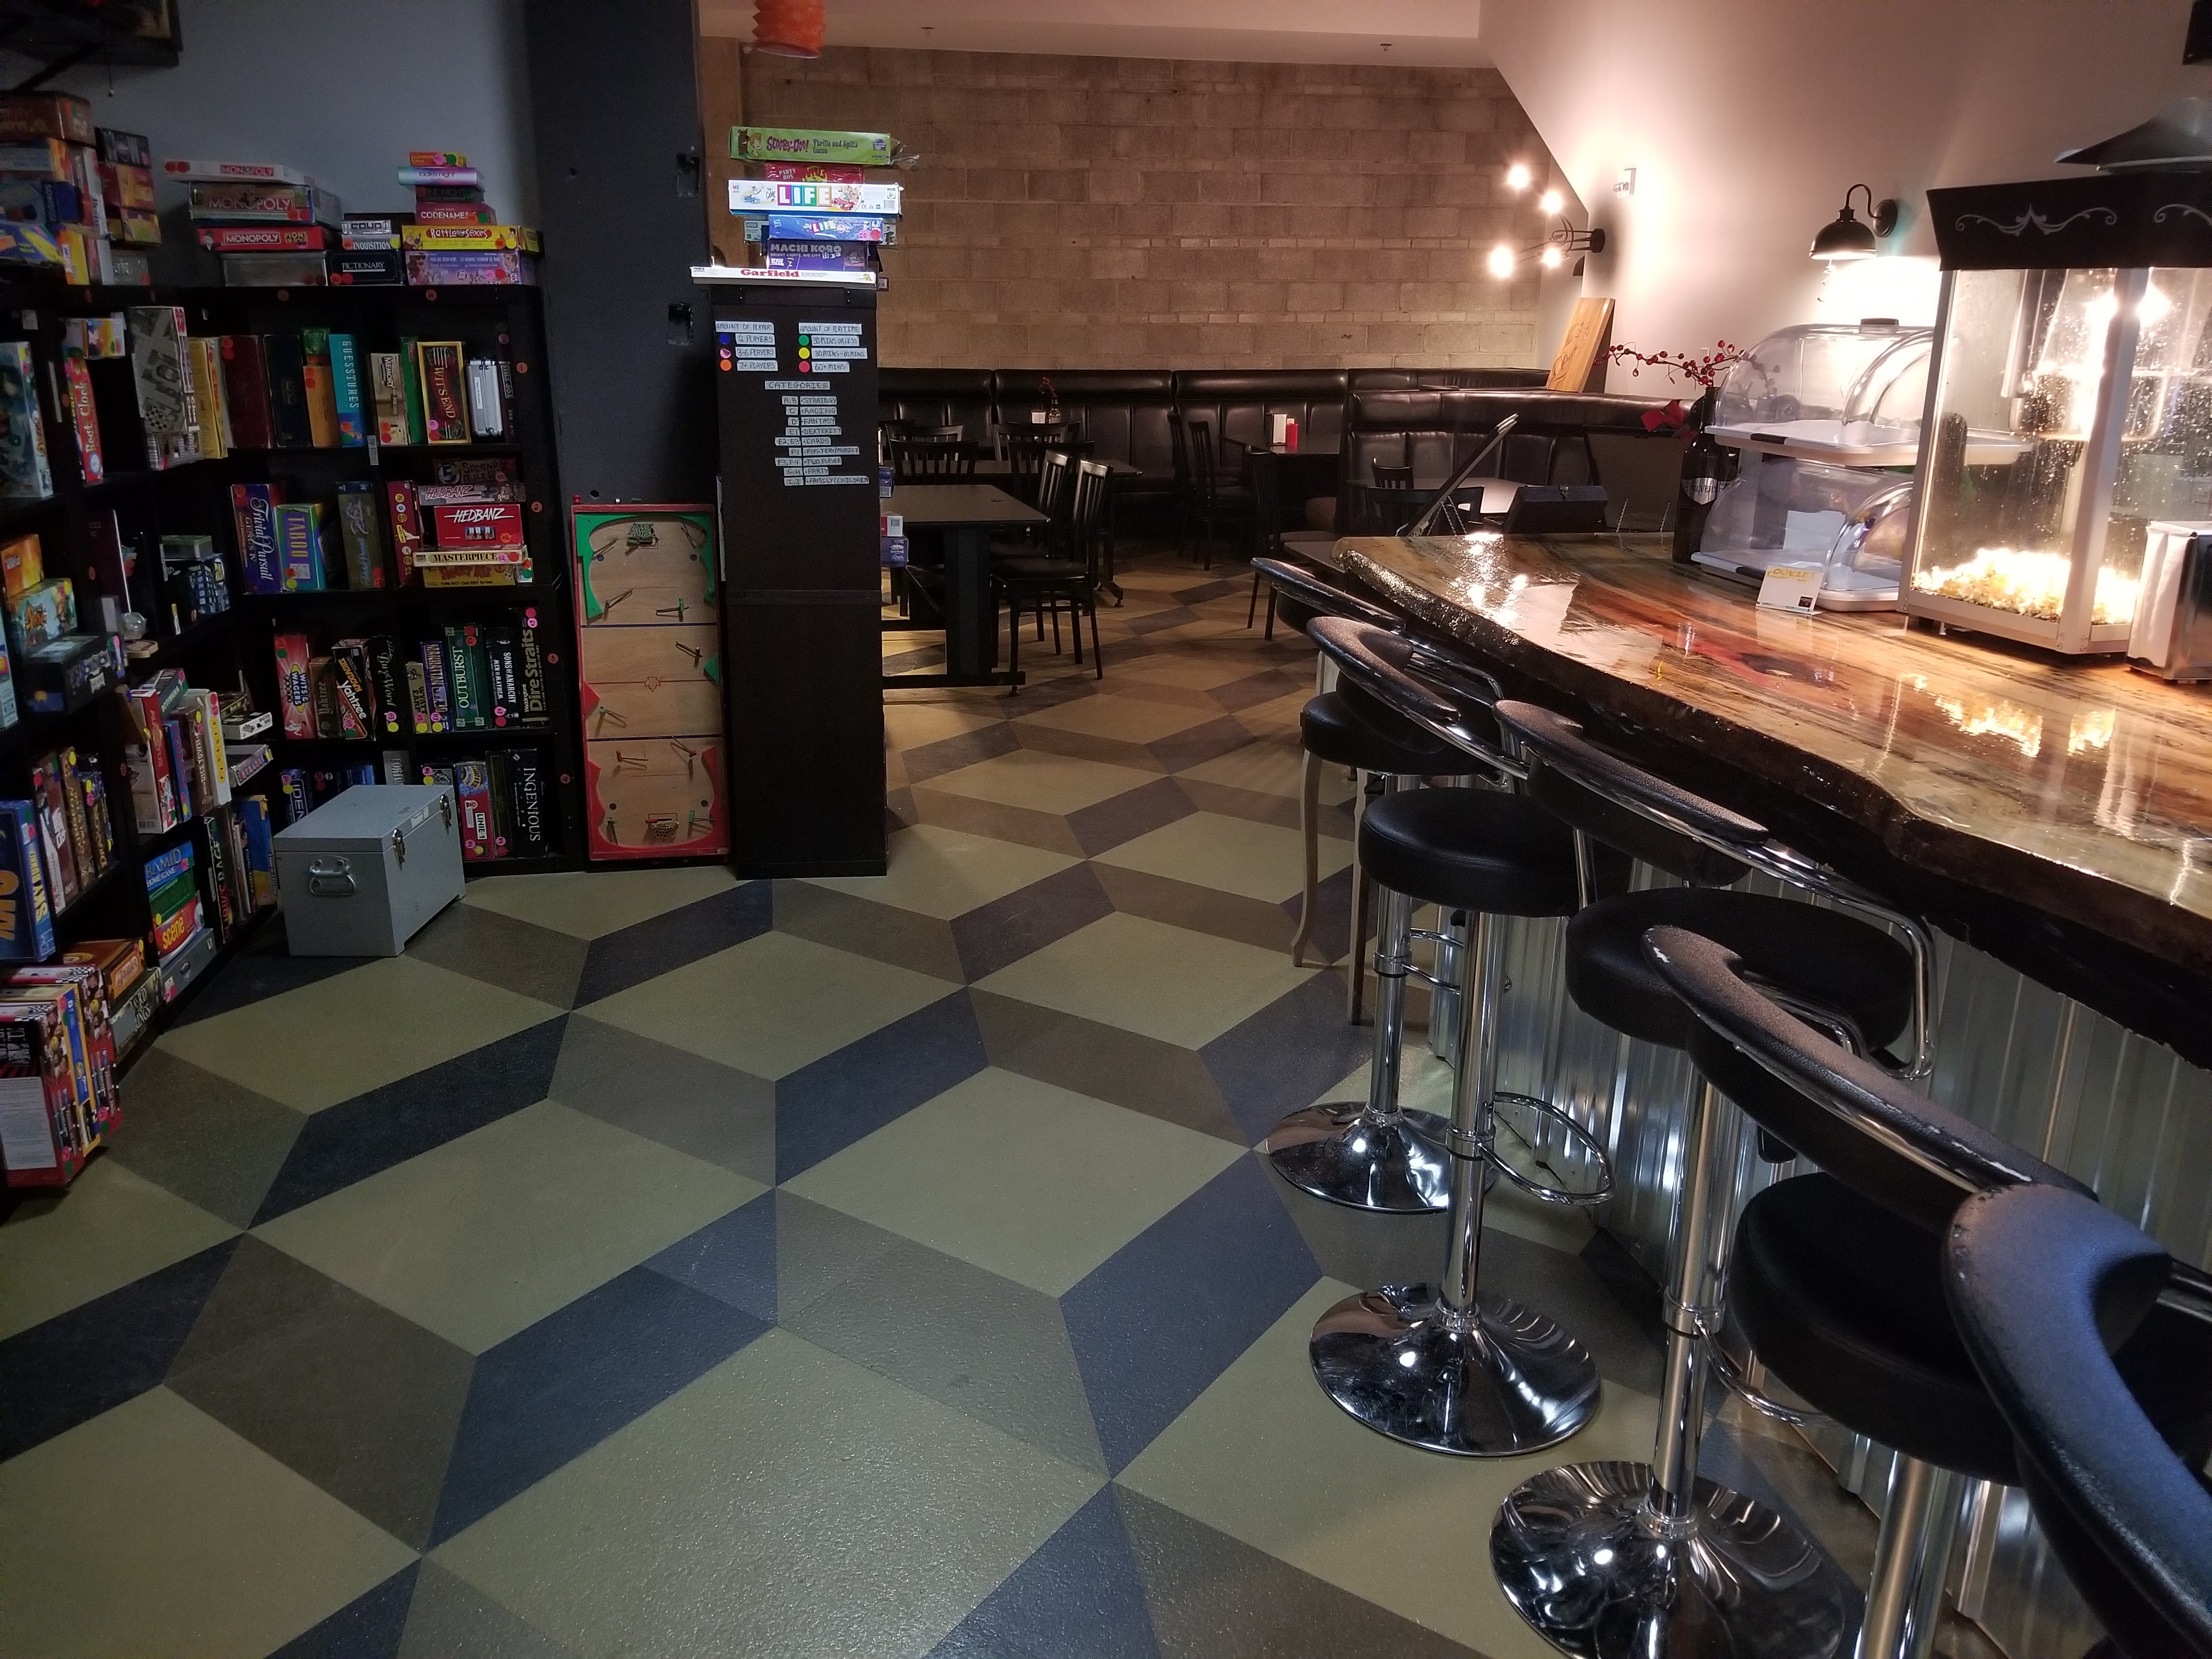 Picture of a cafe with tall chairs at a counter, shelves with board games, and at the back is a lounge with tables and chairs.